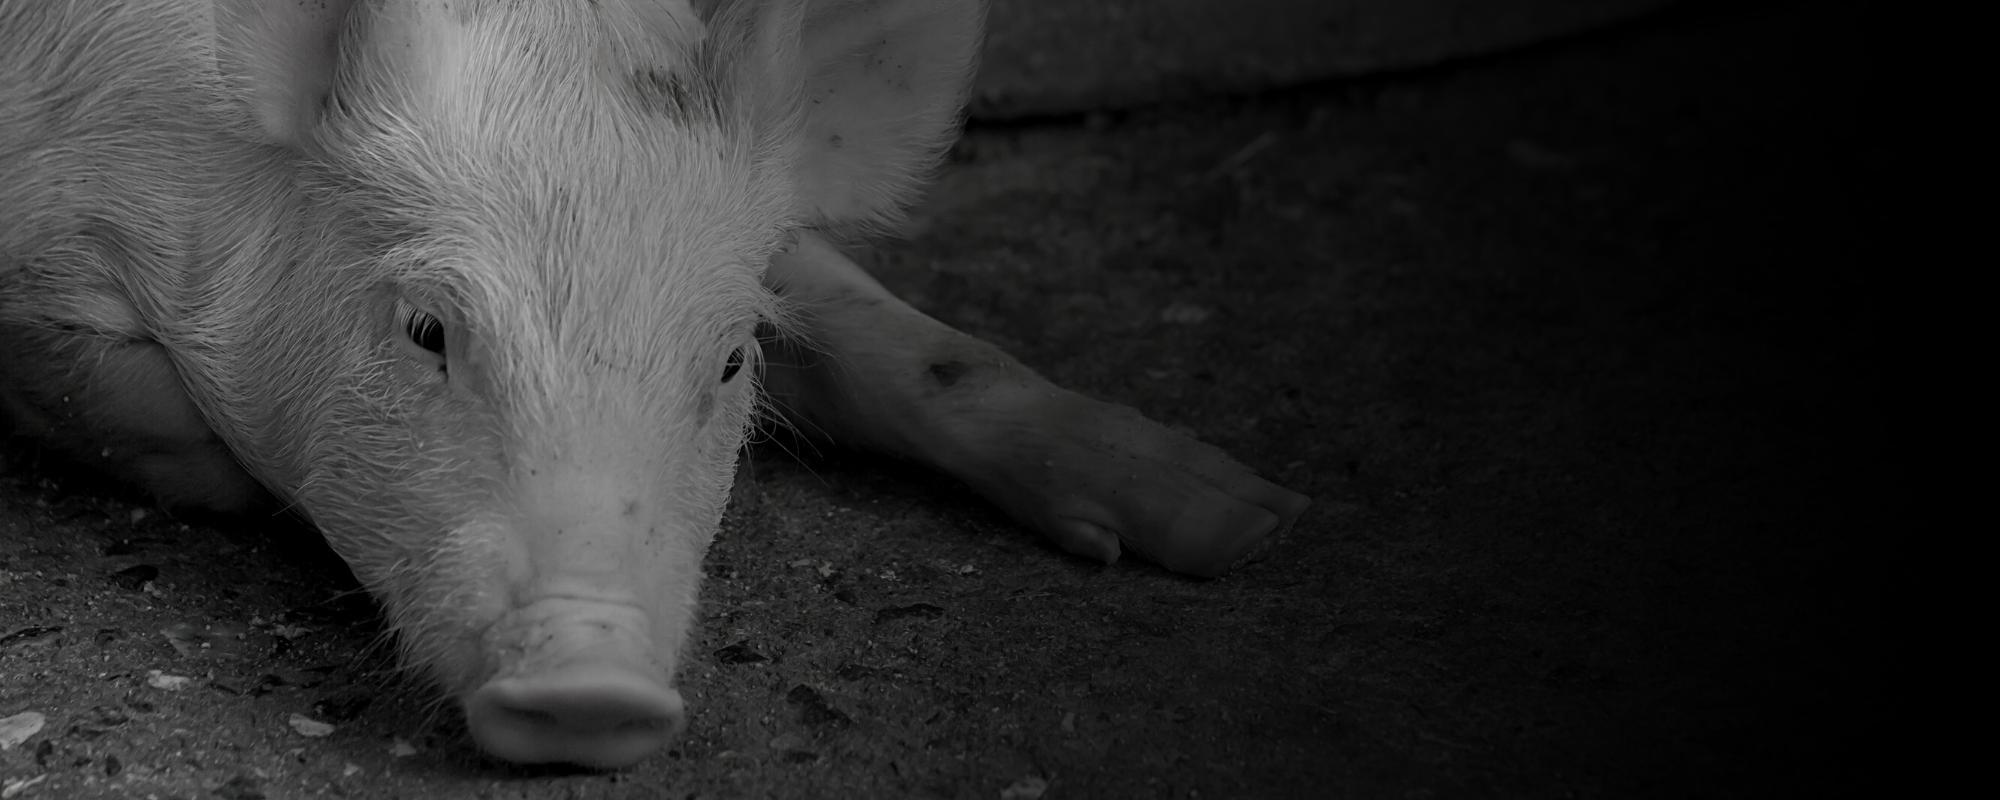 Pig laying on the ground